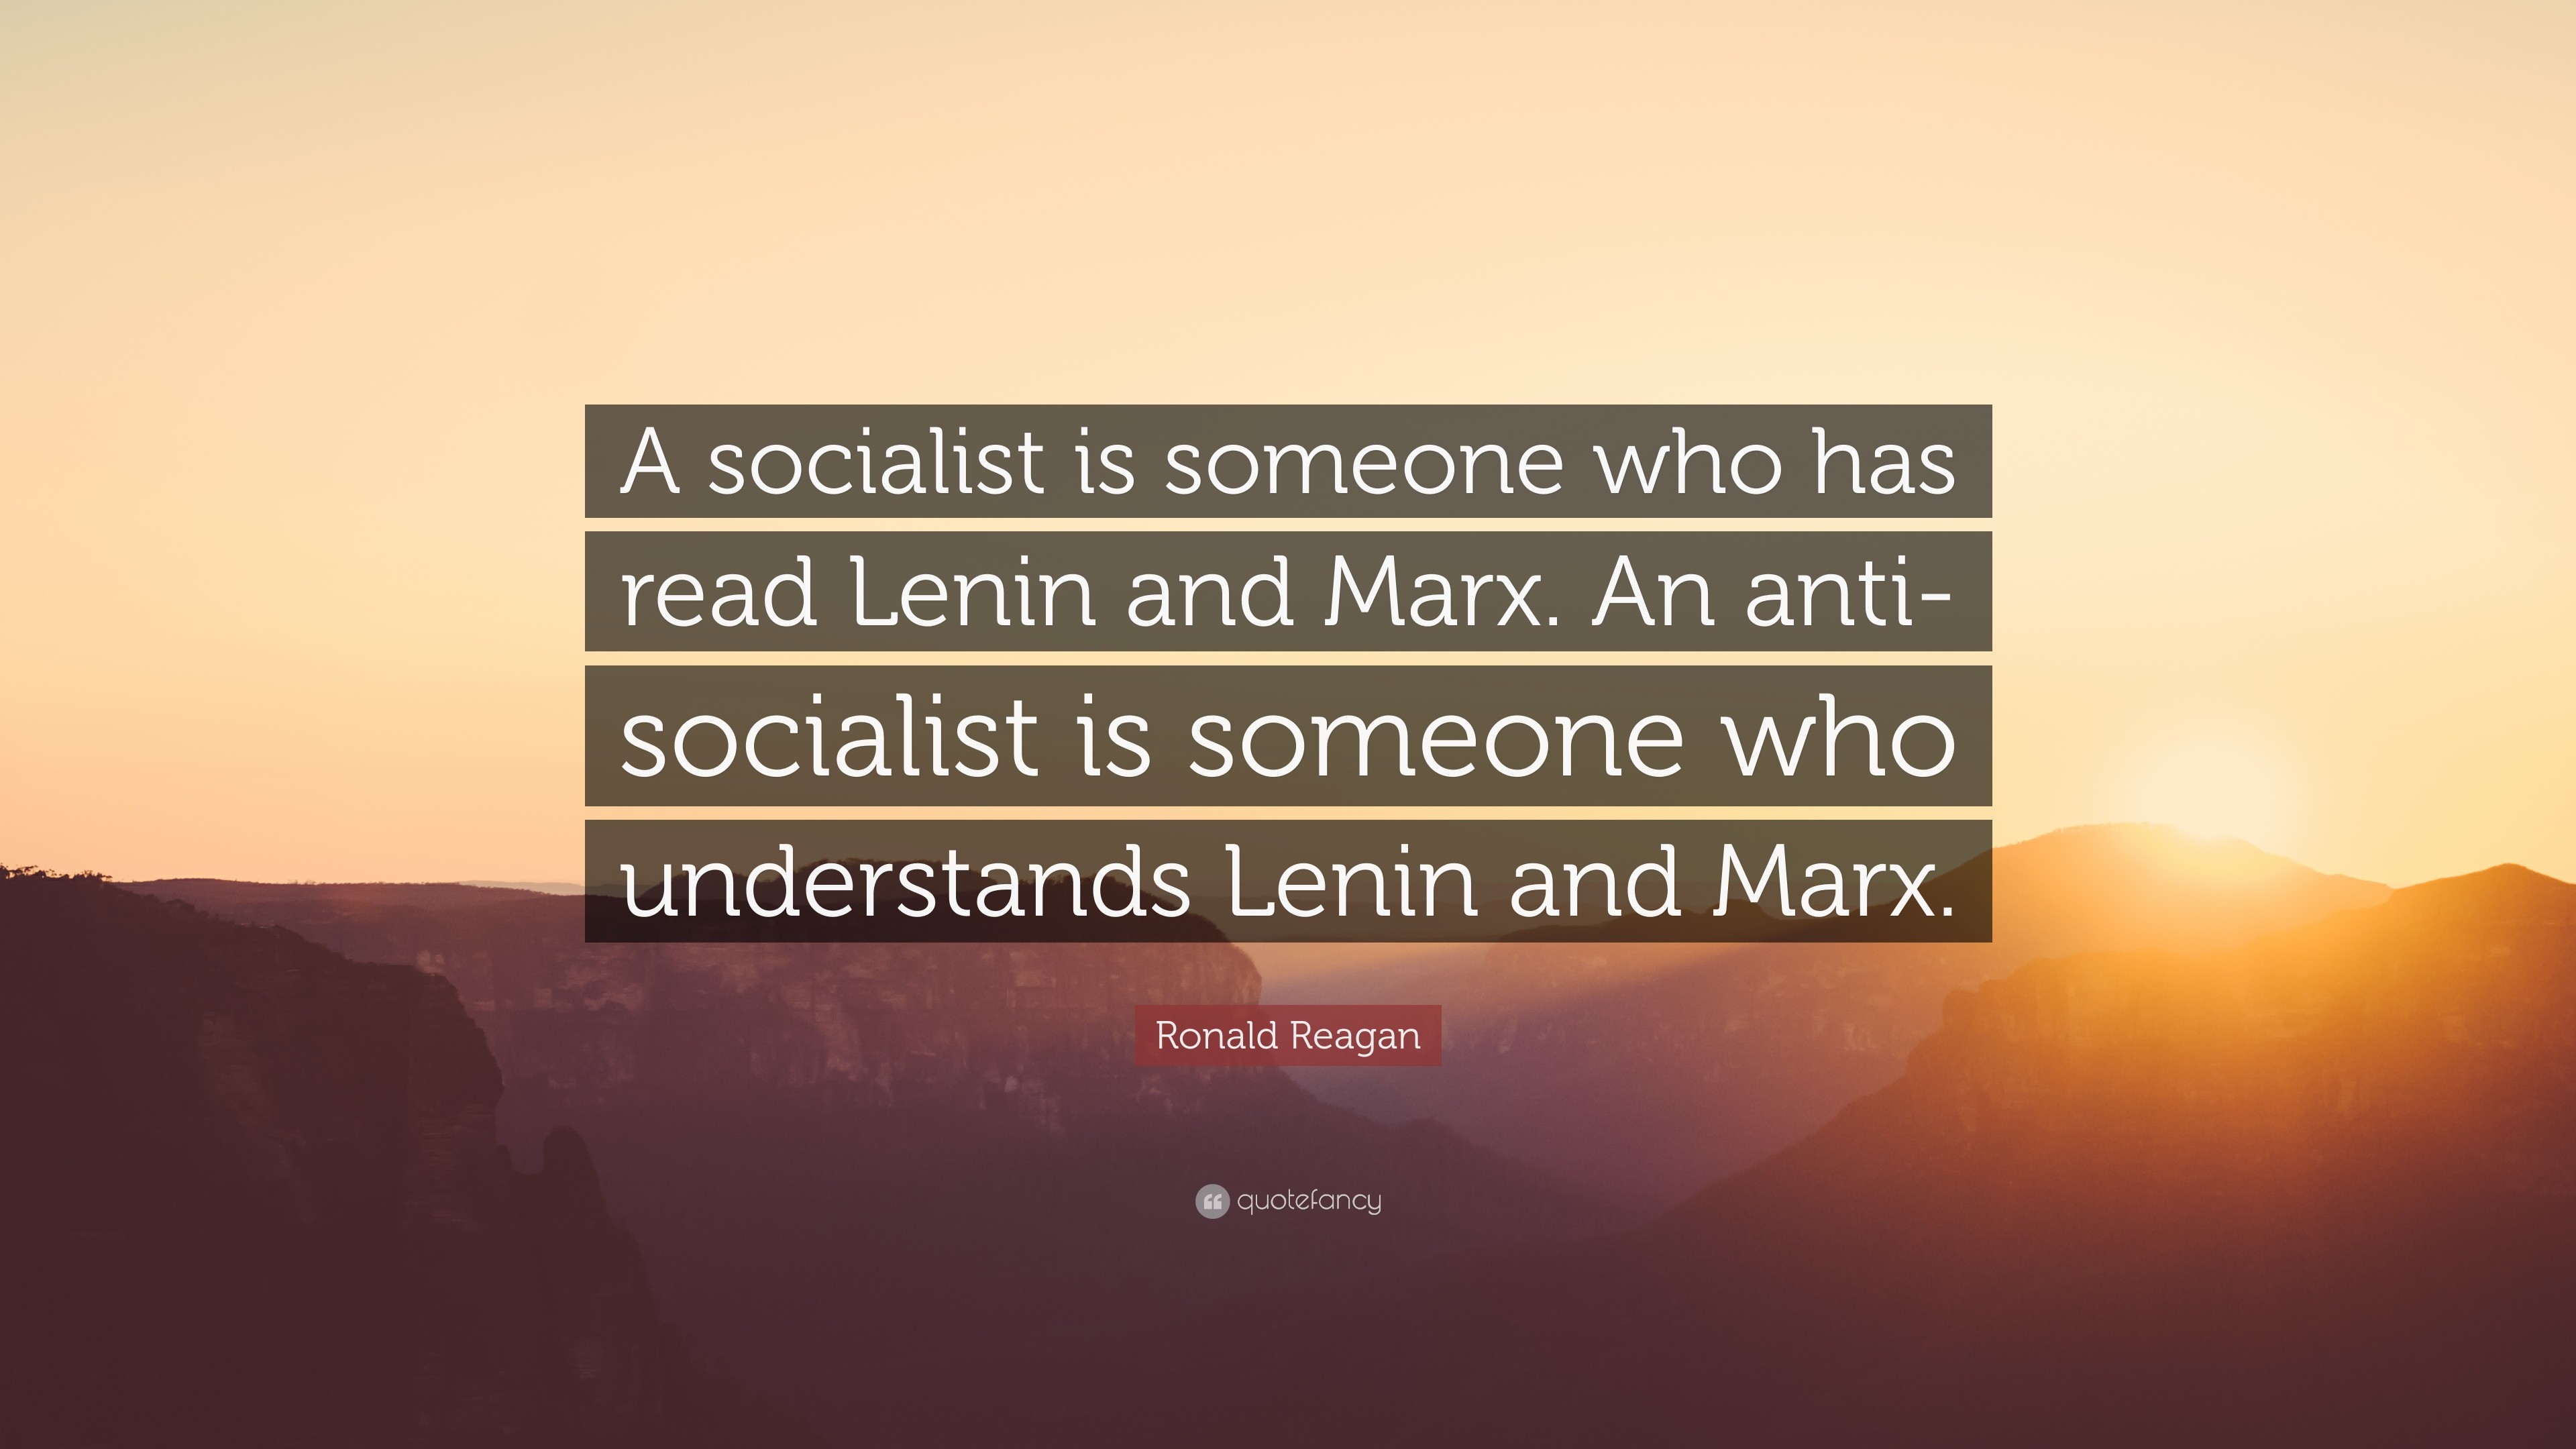 3840x2160 Ronald Reagan Quote: “A socialist is someone who has read Lenin and Marx.